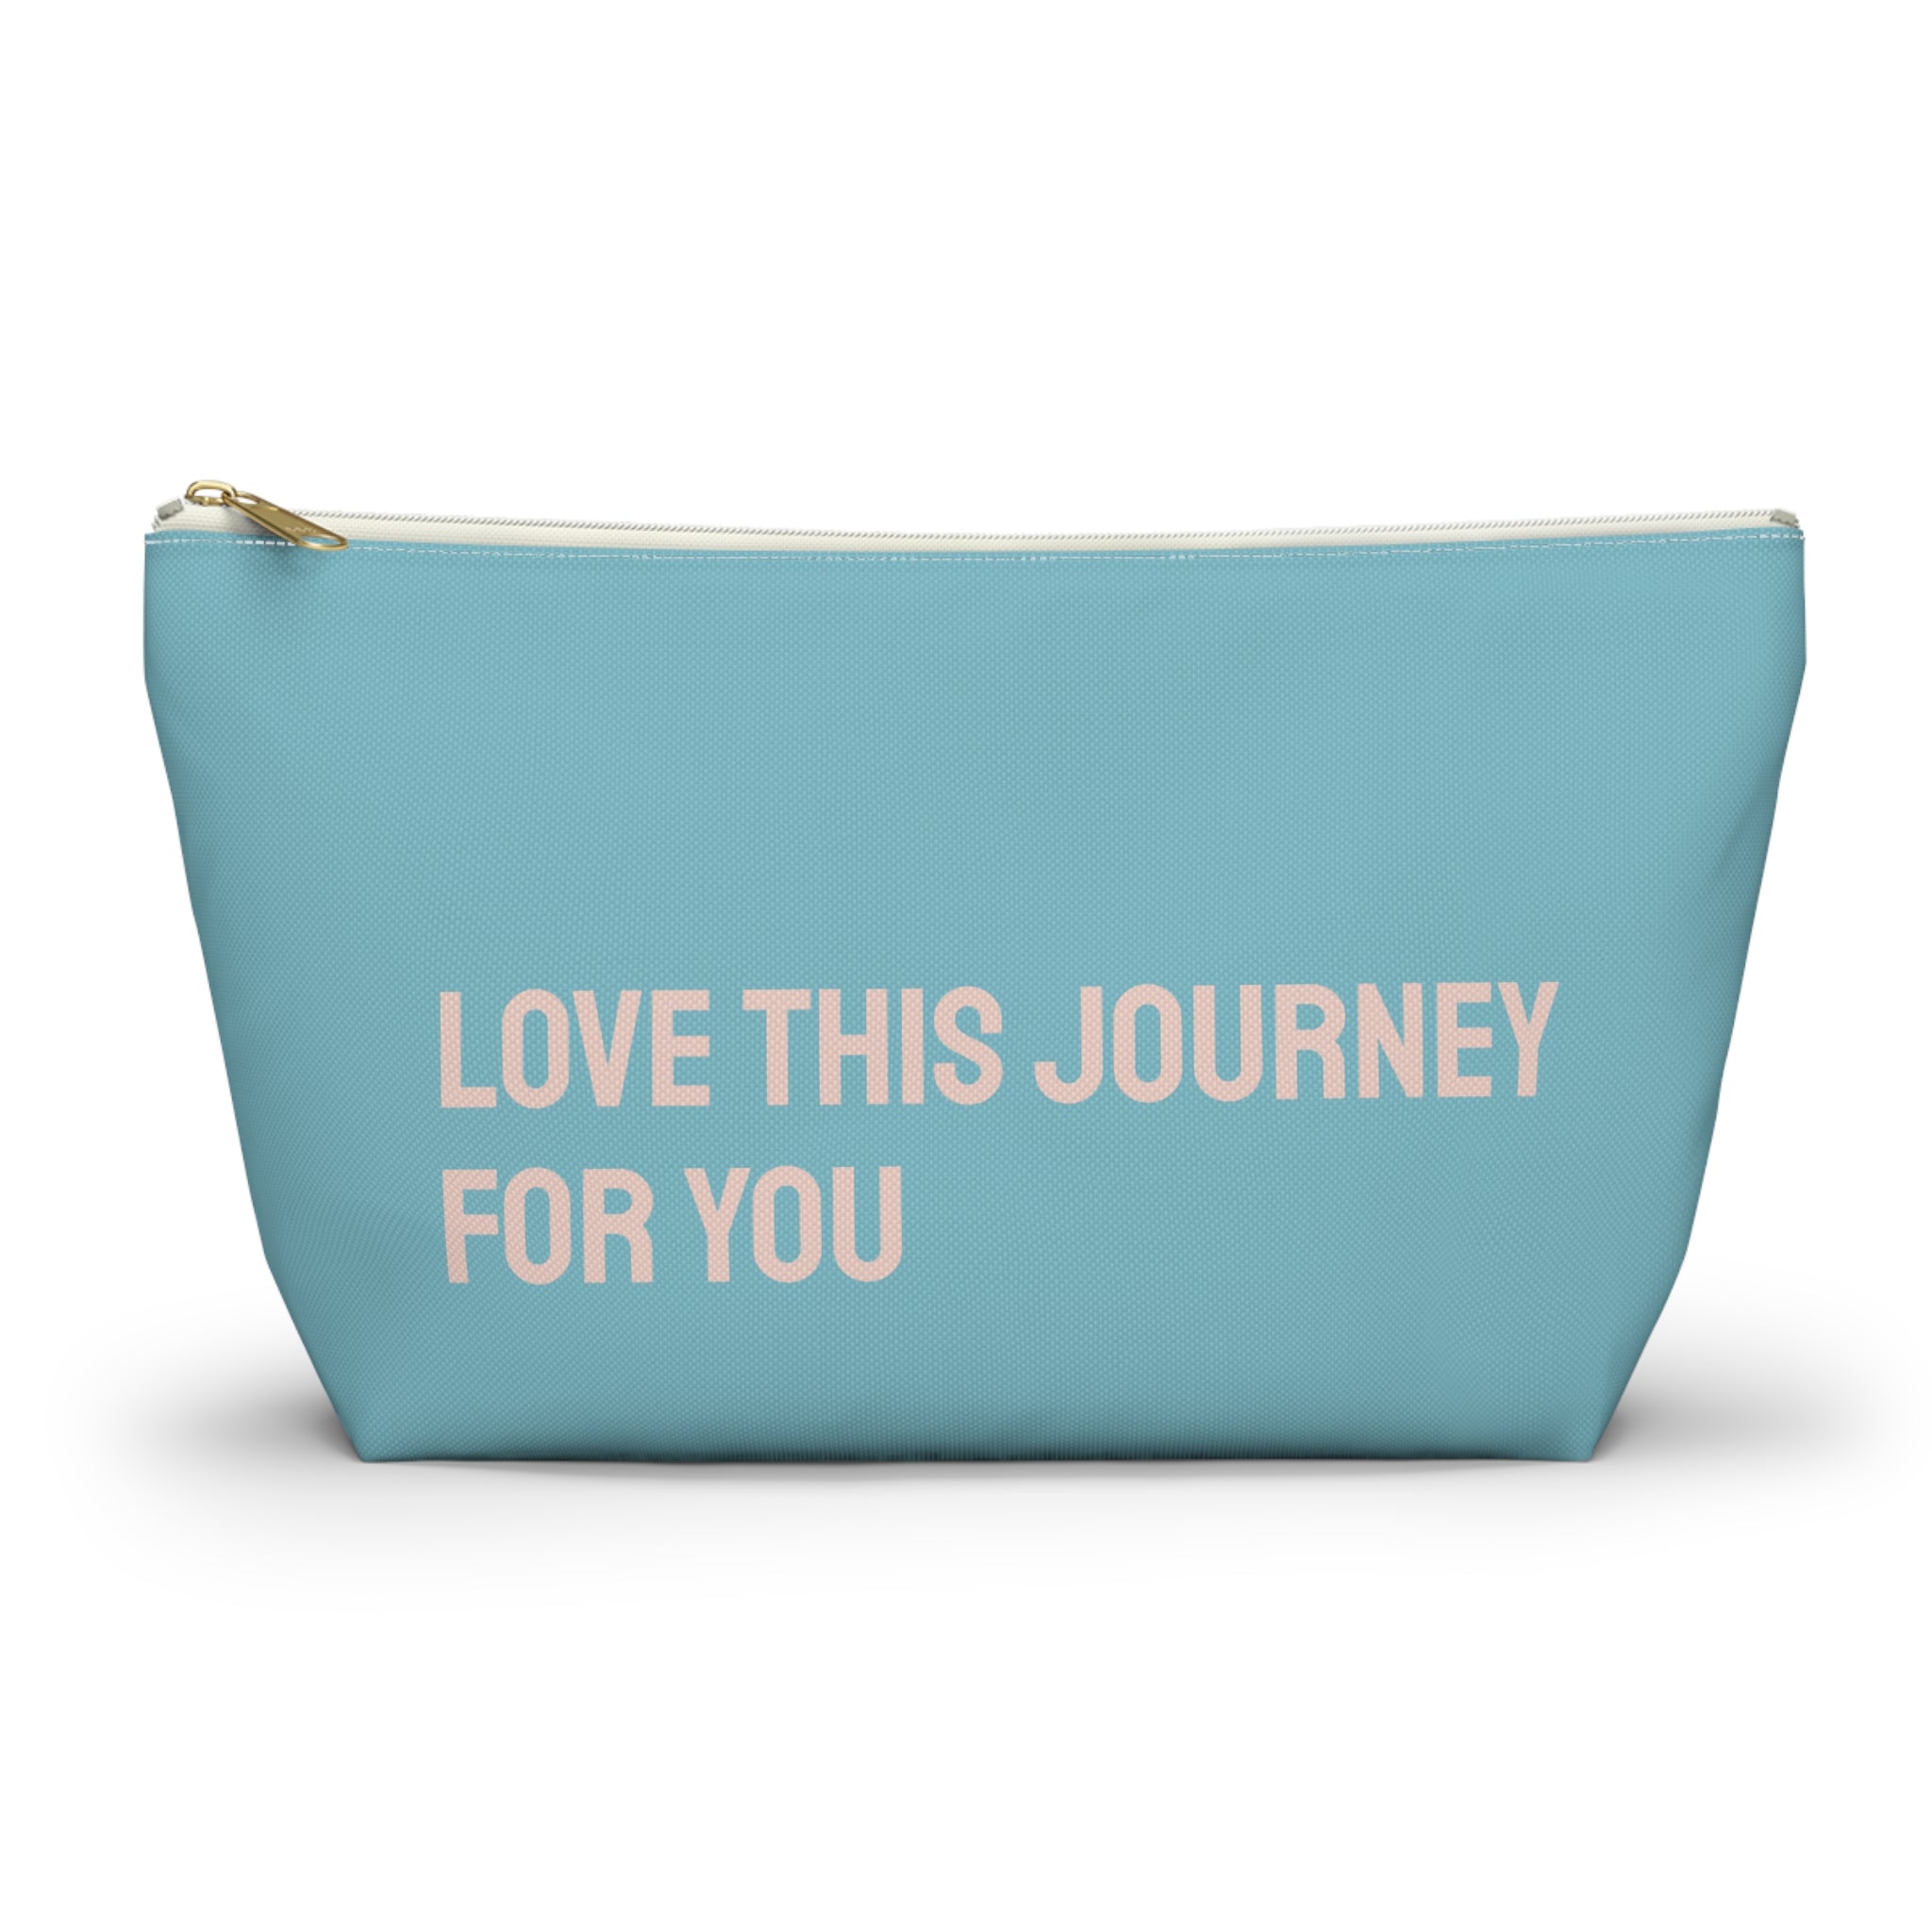 Love this journey for you Pouch (Blue)